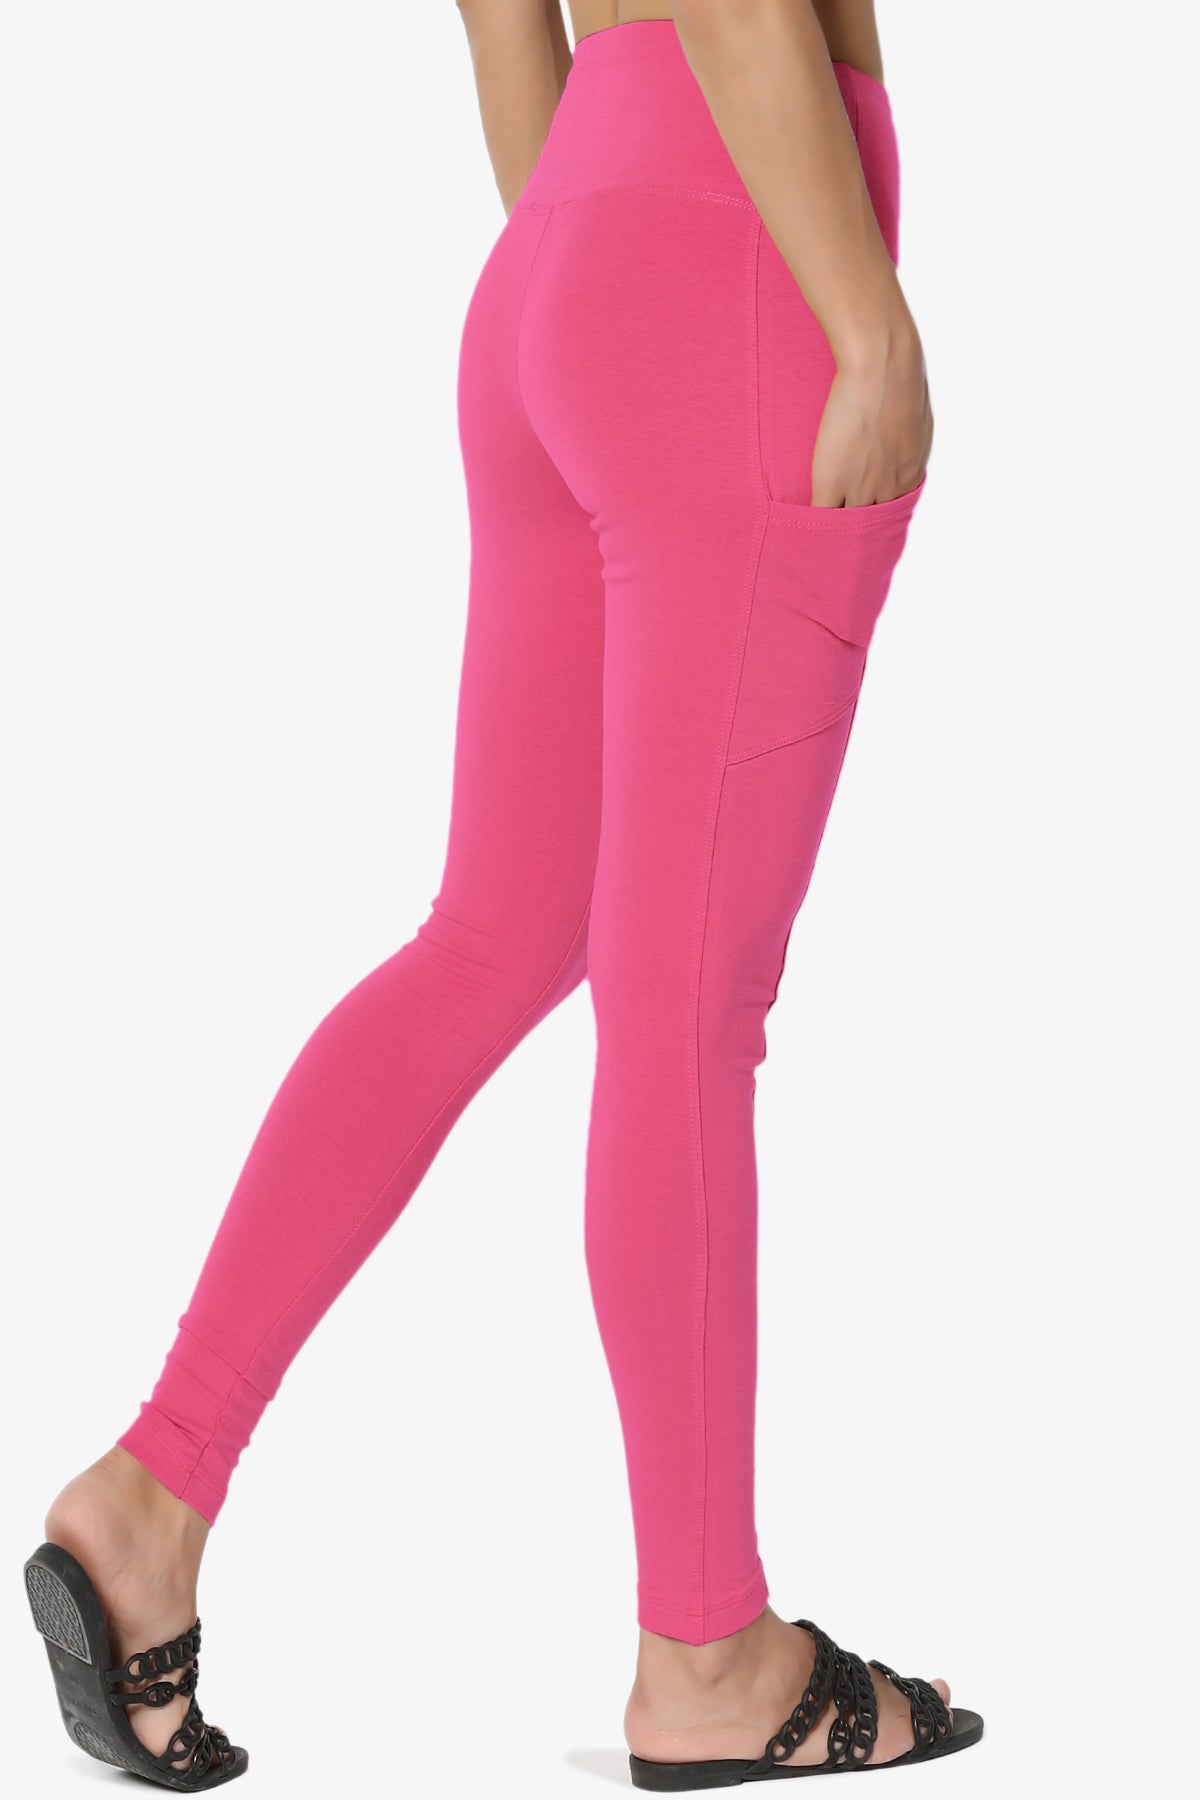 Ansley Luxe Cotton Leggings with Pockets HOT PINK_4